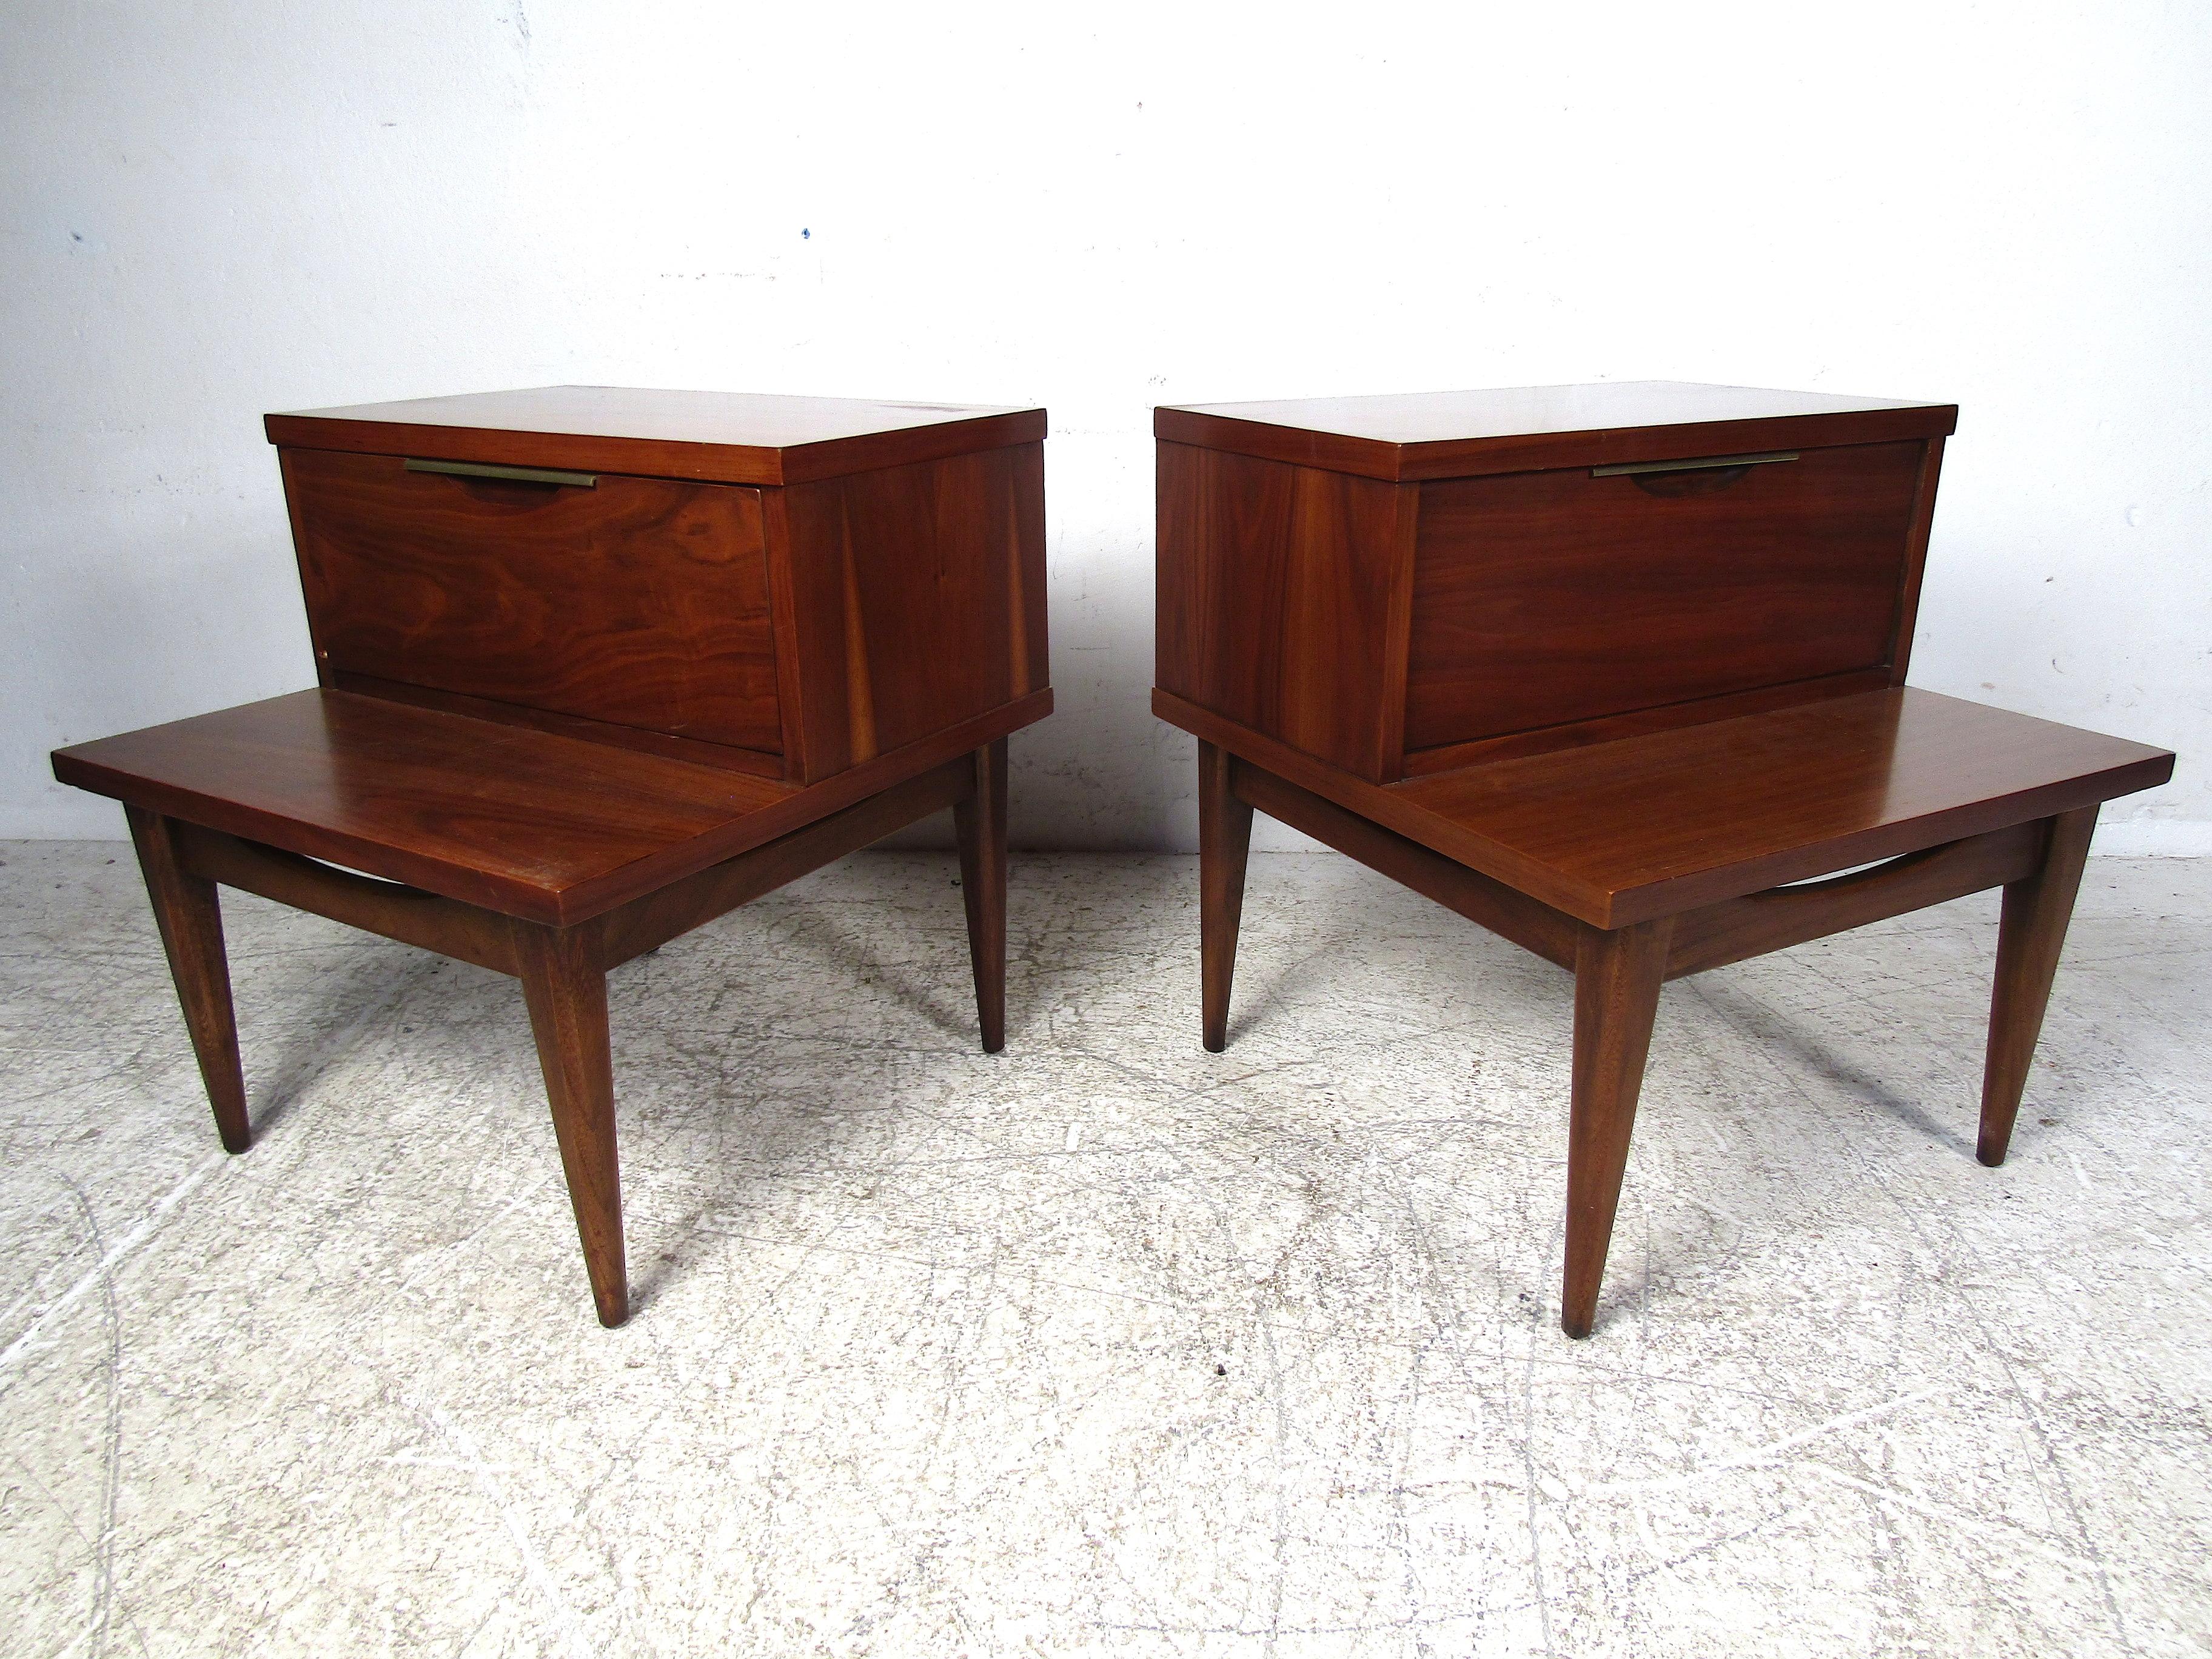 Beautiful pair of midcentury nightstands. Manufactured by Kent Coffey - part of the 